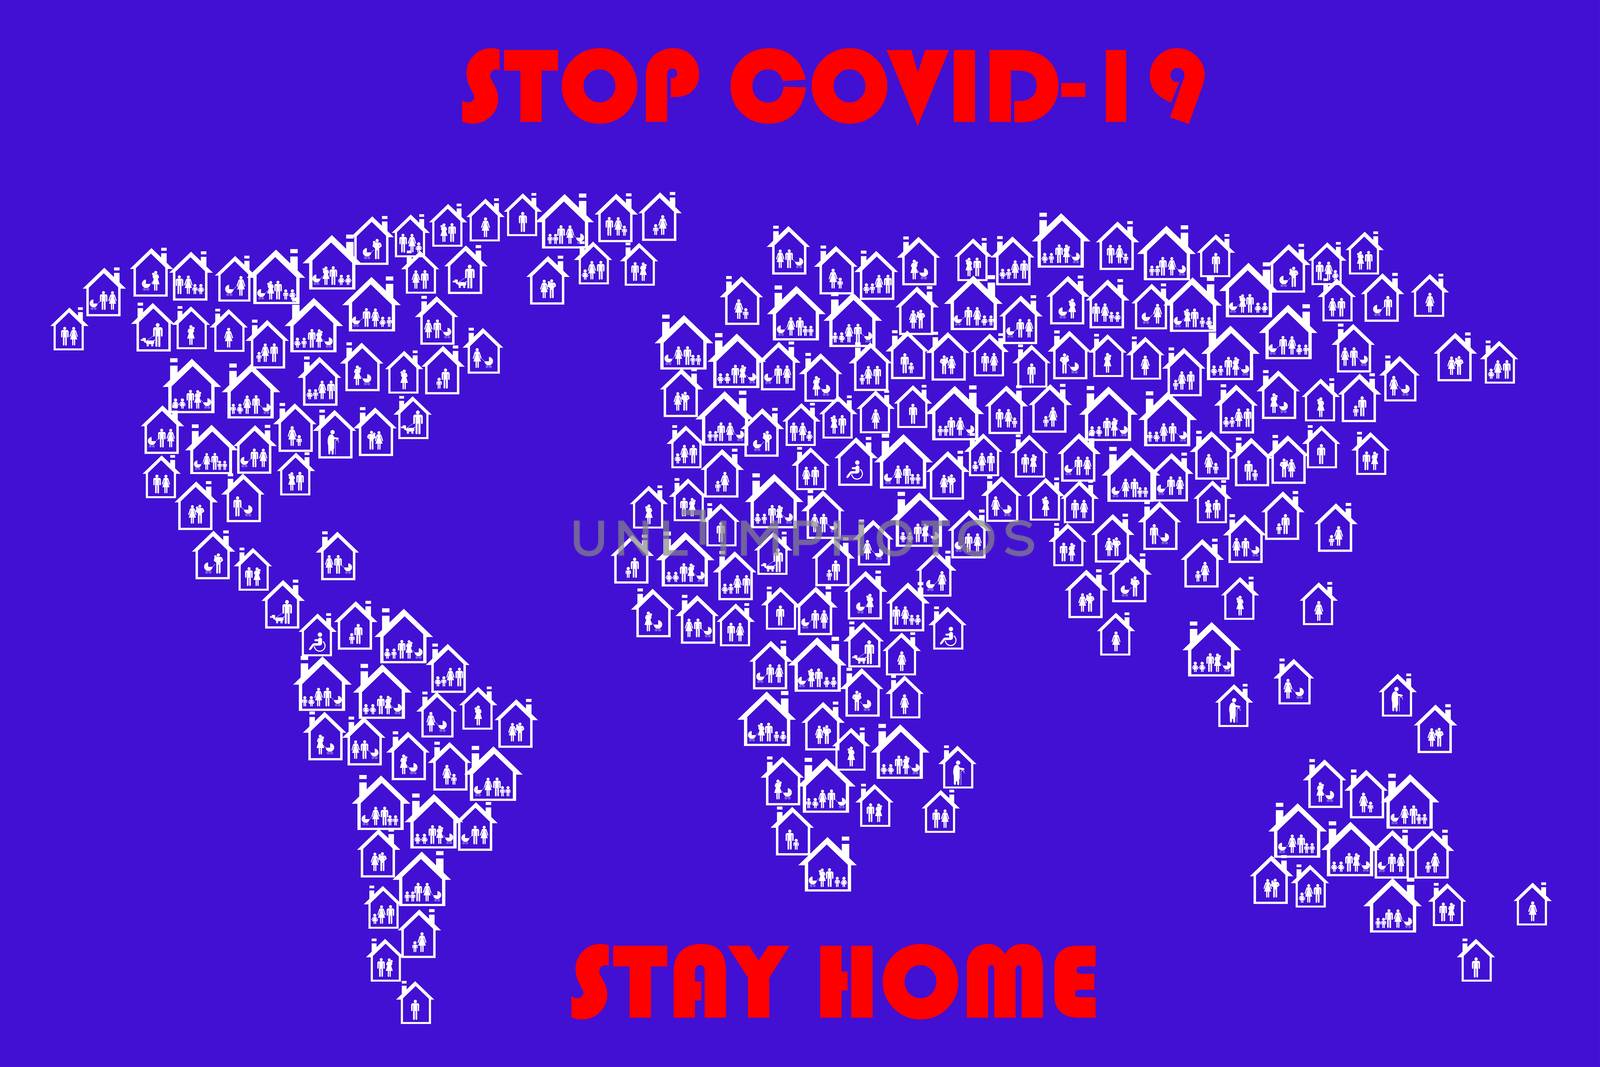 Stay home concept with world map made of houses. Covid-19 coronavirus quarantine campaign